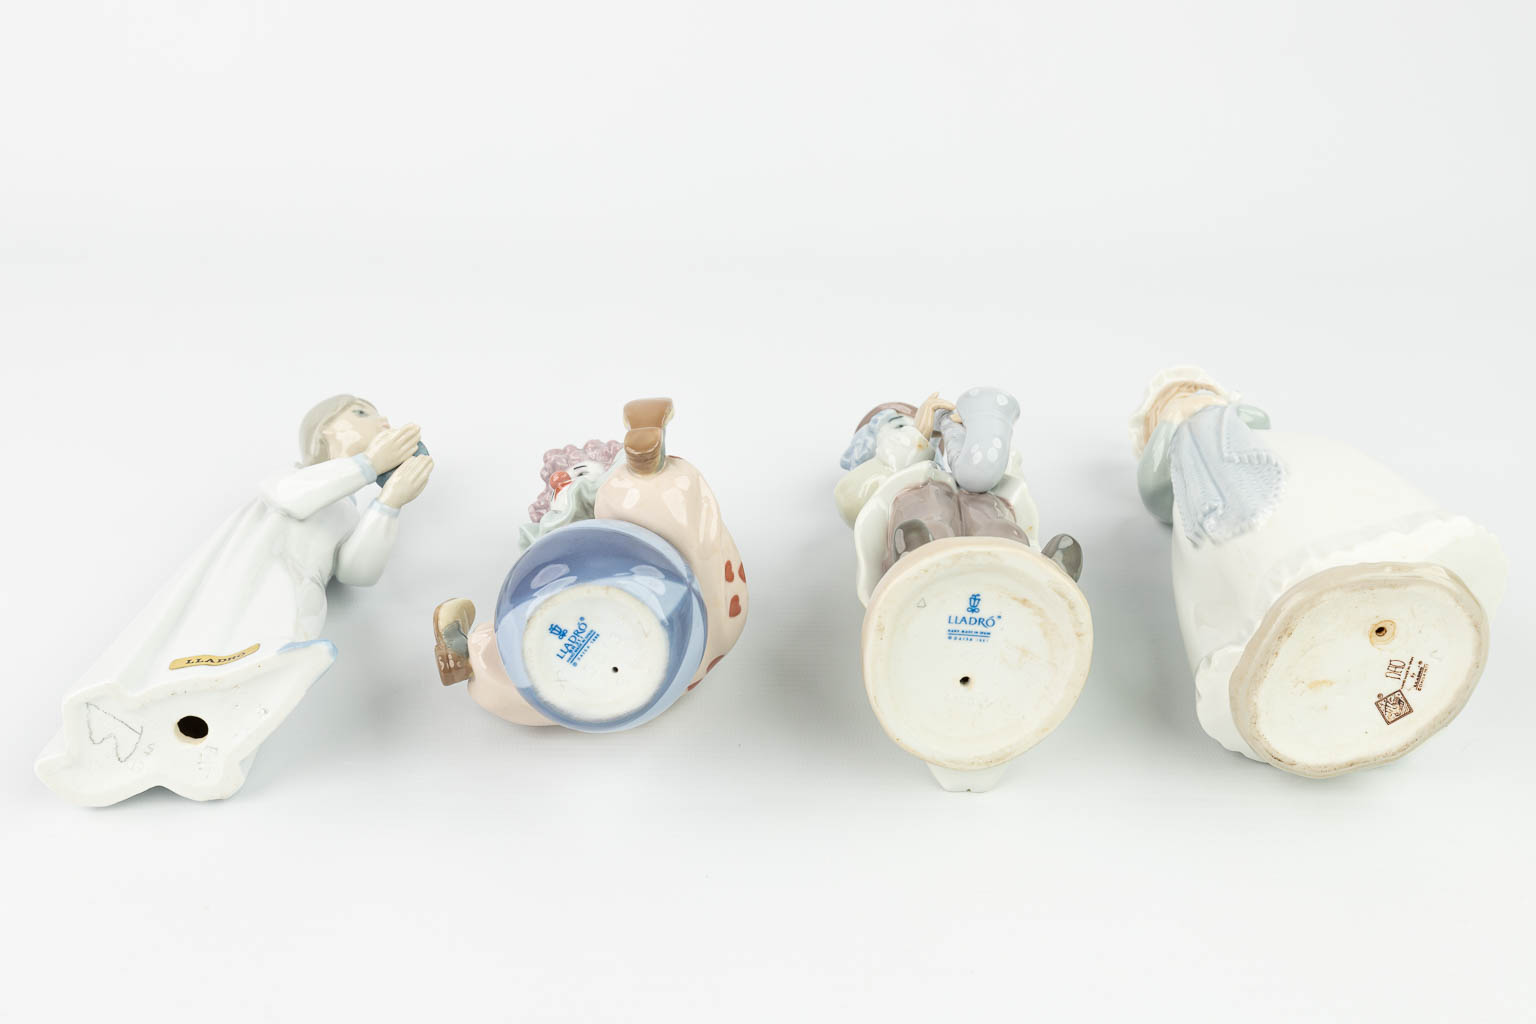 A collection of 4 figurines made of porcelain in Spain and marked Lladro. (H:24cm)